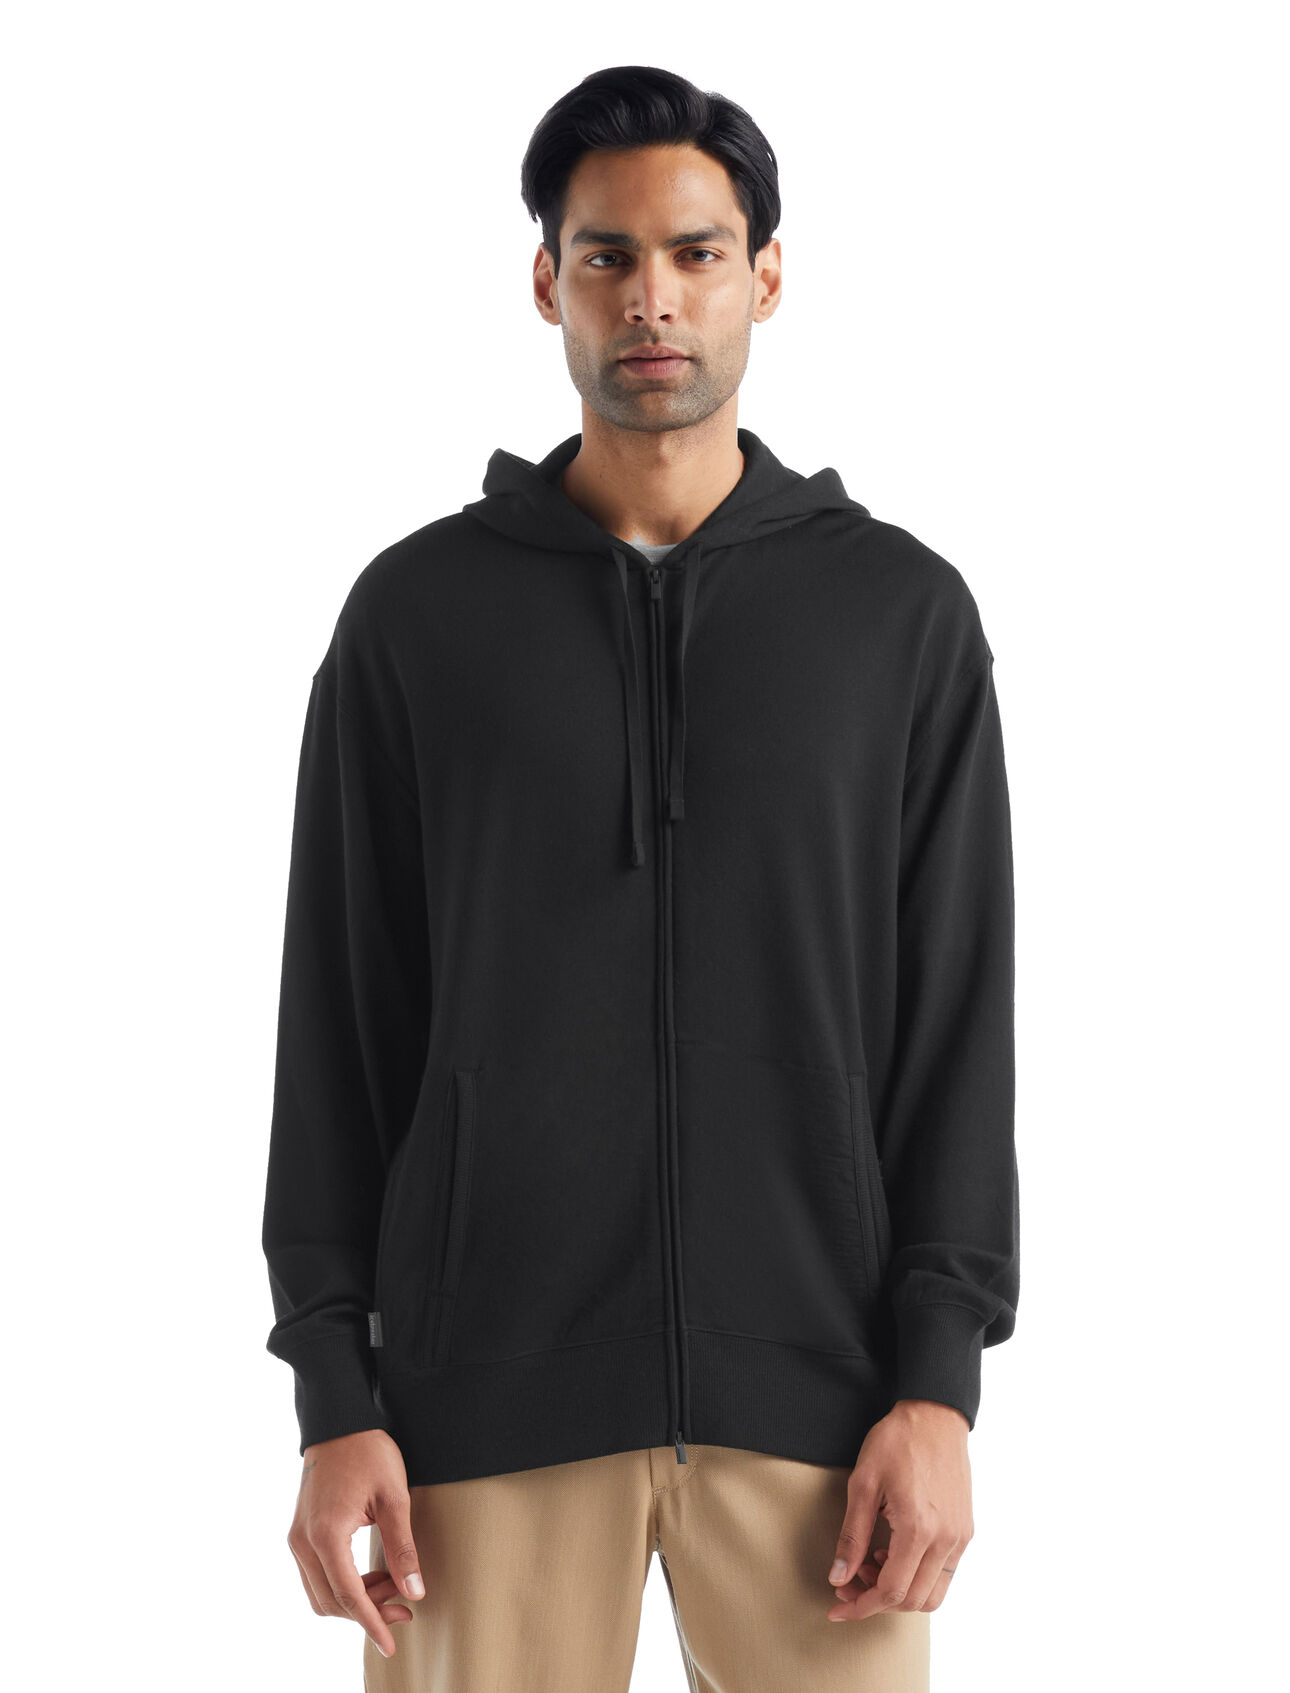 Mens Merino Dalston Terry Long Sleeve Zip Hoodie An everyday hoodie with added style details for casual layering comfort, the Dalston Terry Long Sleeve Zip Hoodie features a soft and breathable, 100% merino wool body.